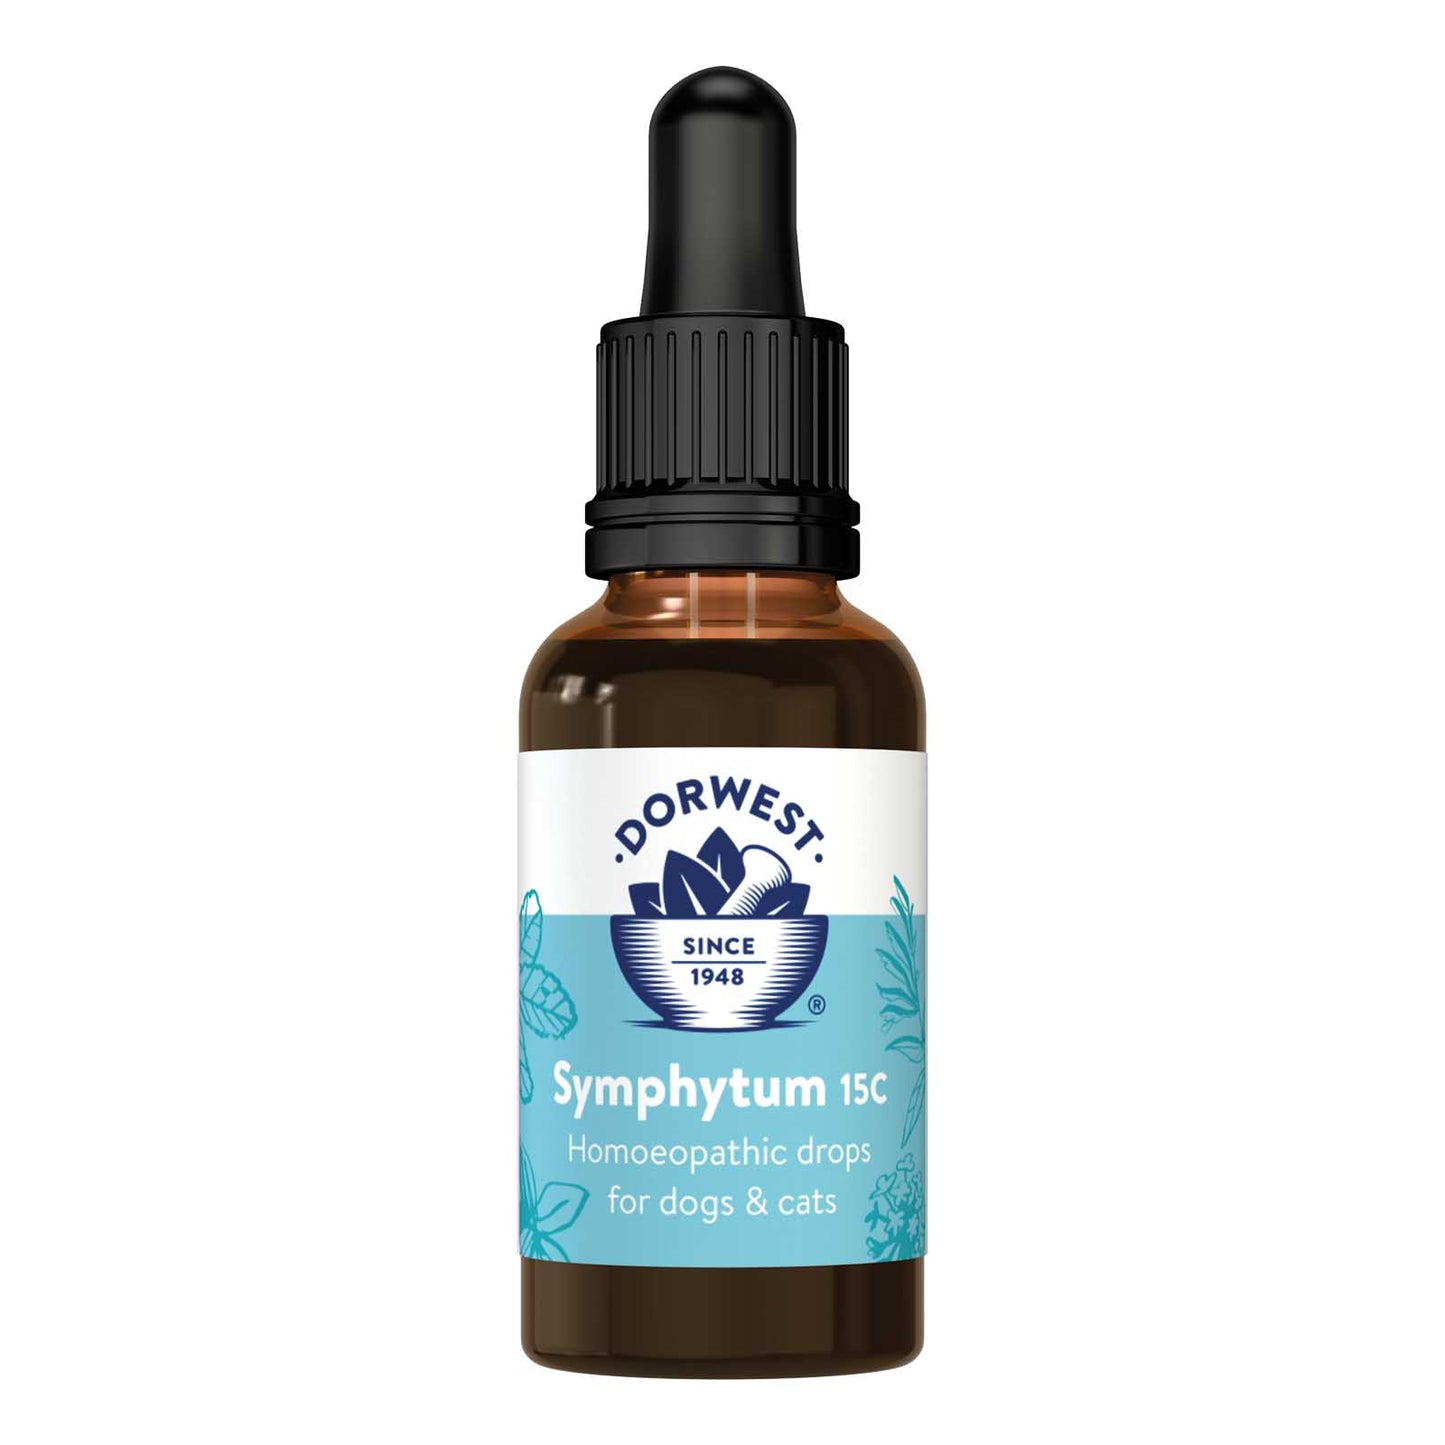 Dorwest Symphytum 15C 15ml Liquid For Dogs And Cats (Healthy Ligaments & Tendons)